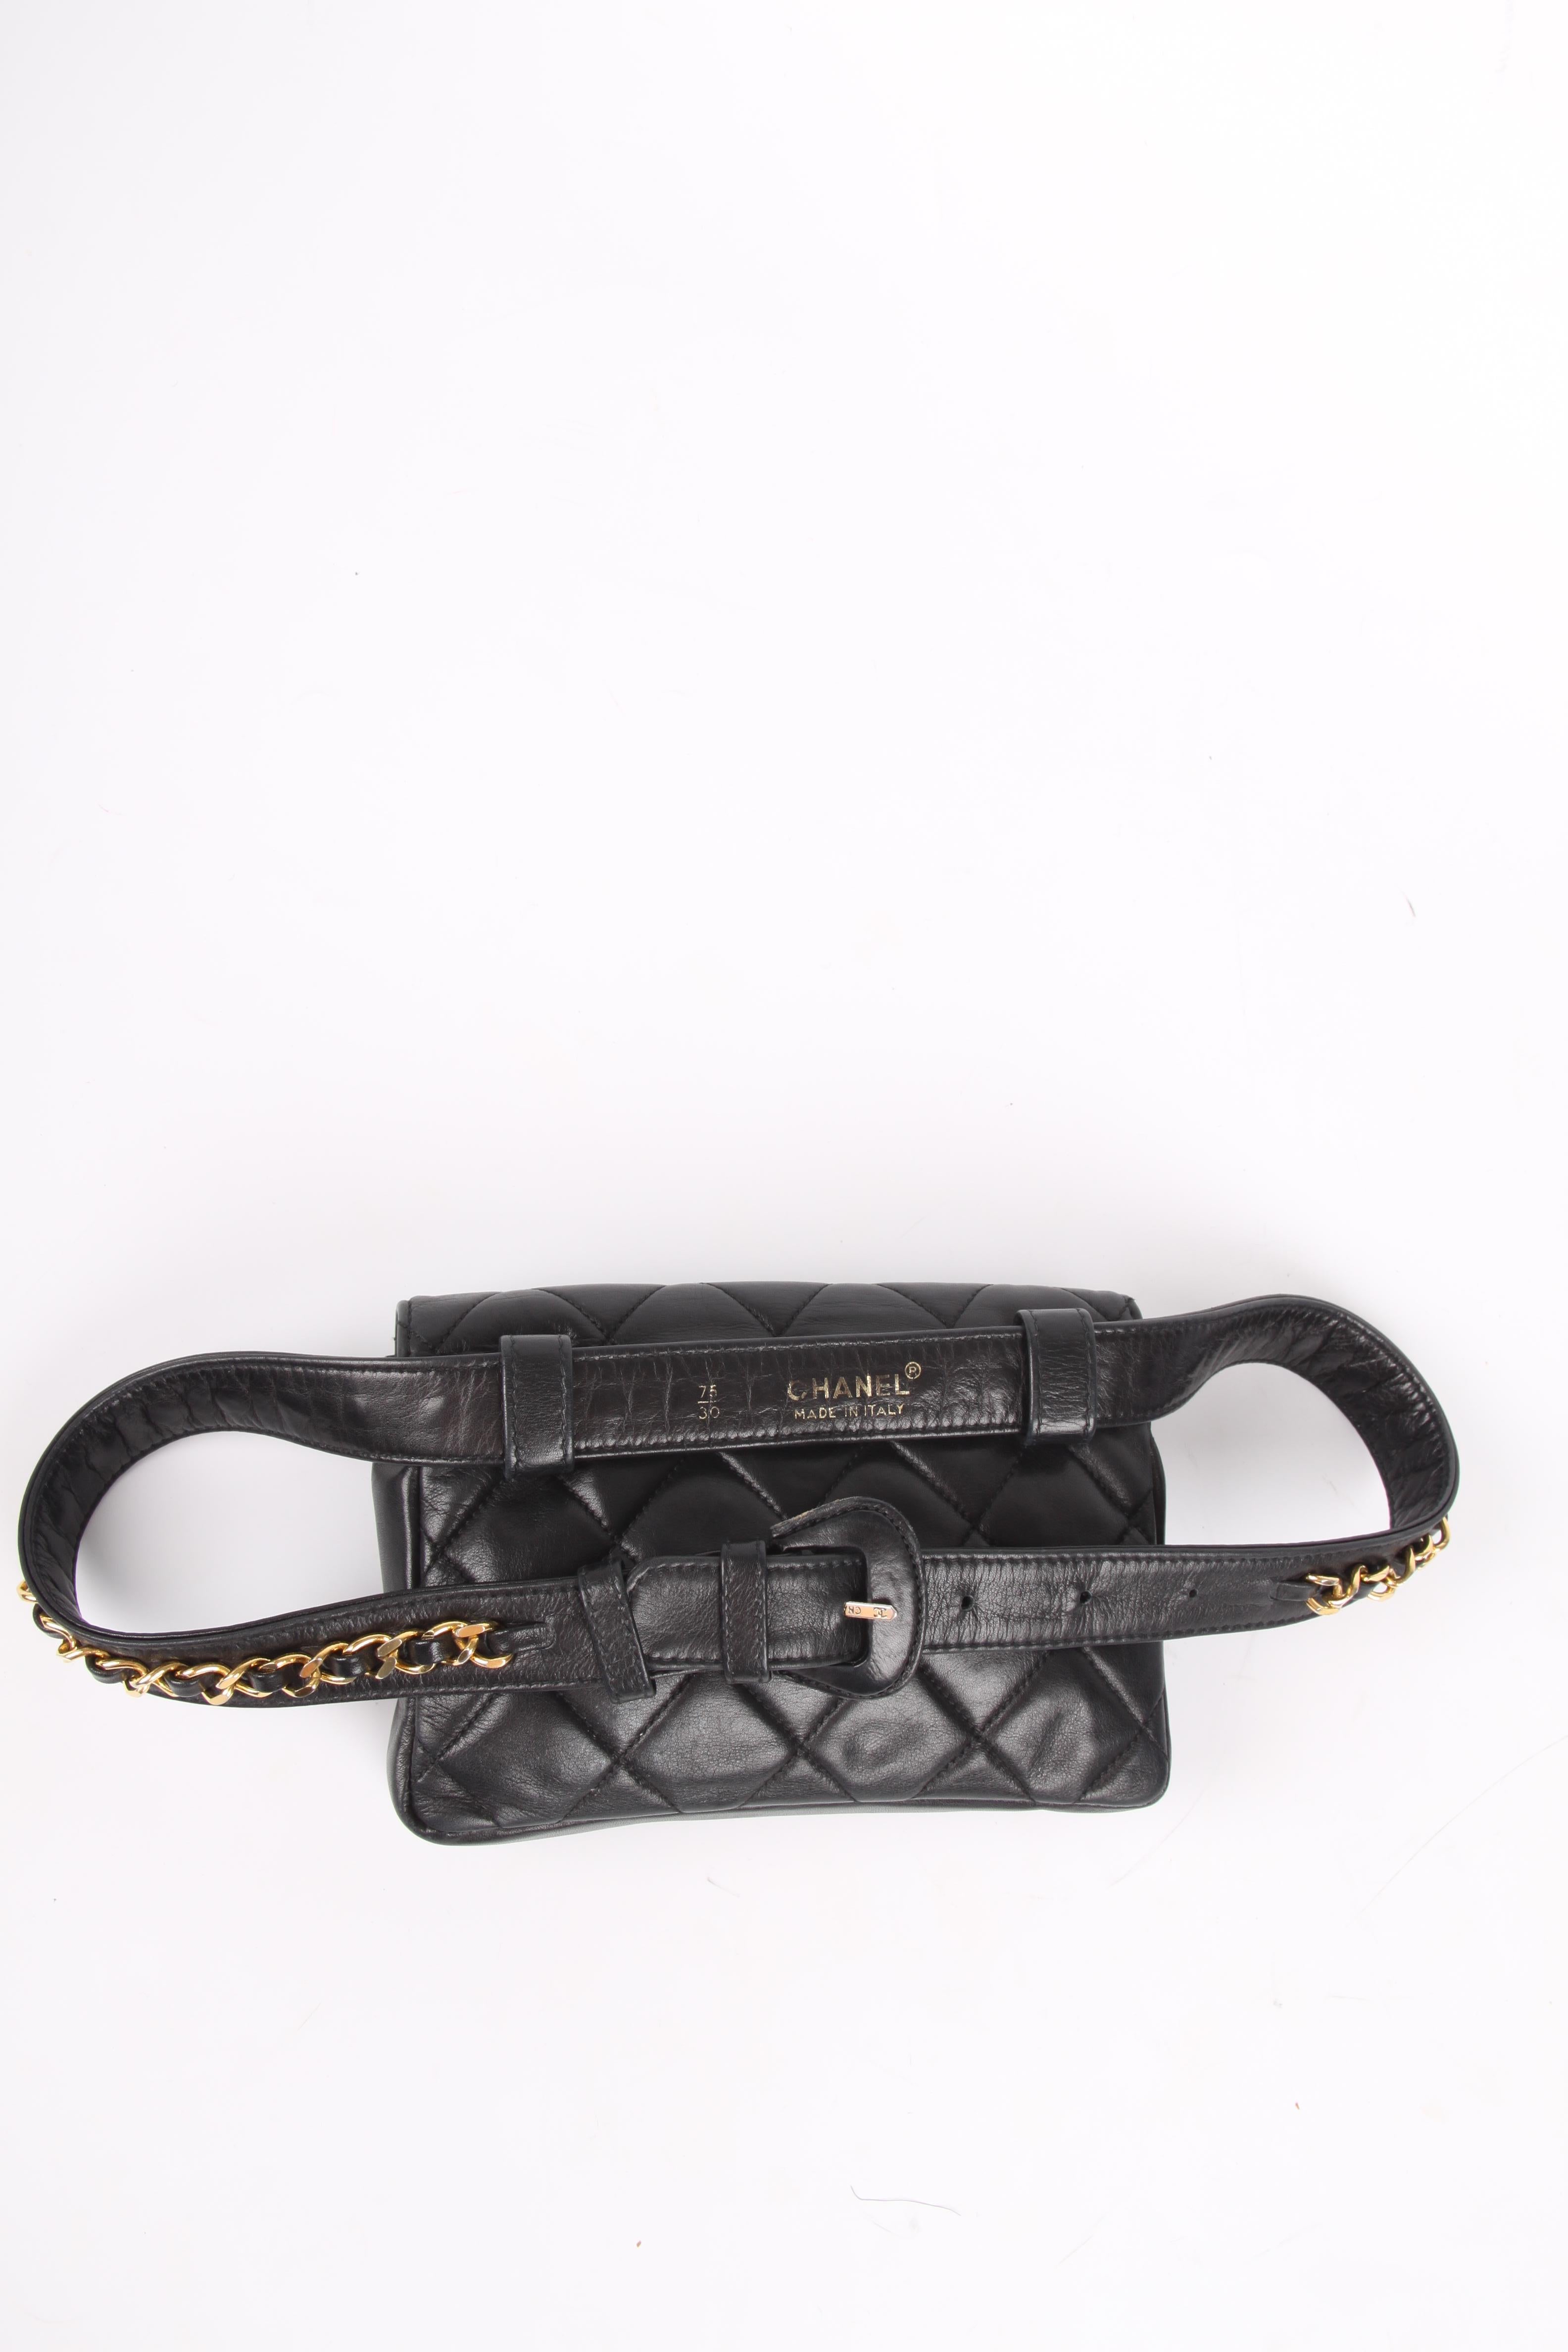 Vintage Chanel Belt Bag with matching belt embellished with a gold-tone chain. 

Quilted smooth calfskin leather, turnlock CC closure at the front. One flat pocket with a zipper, lining in black leather.

Belt: black leather and black leather